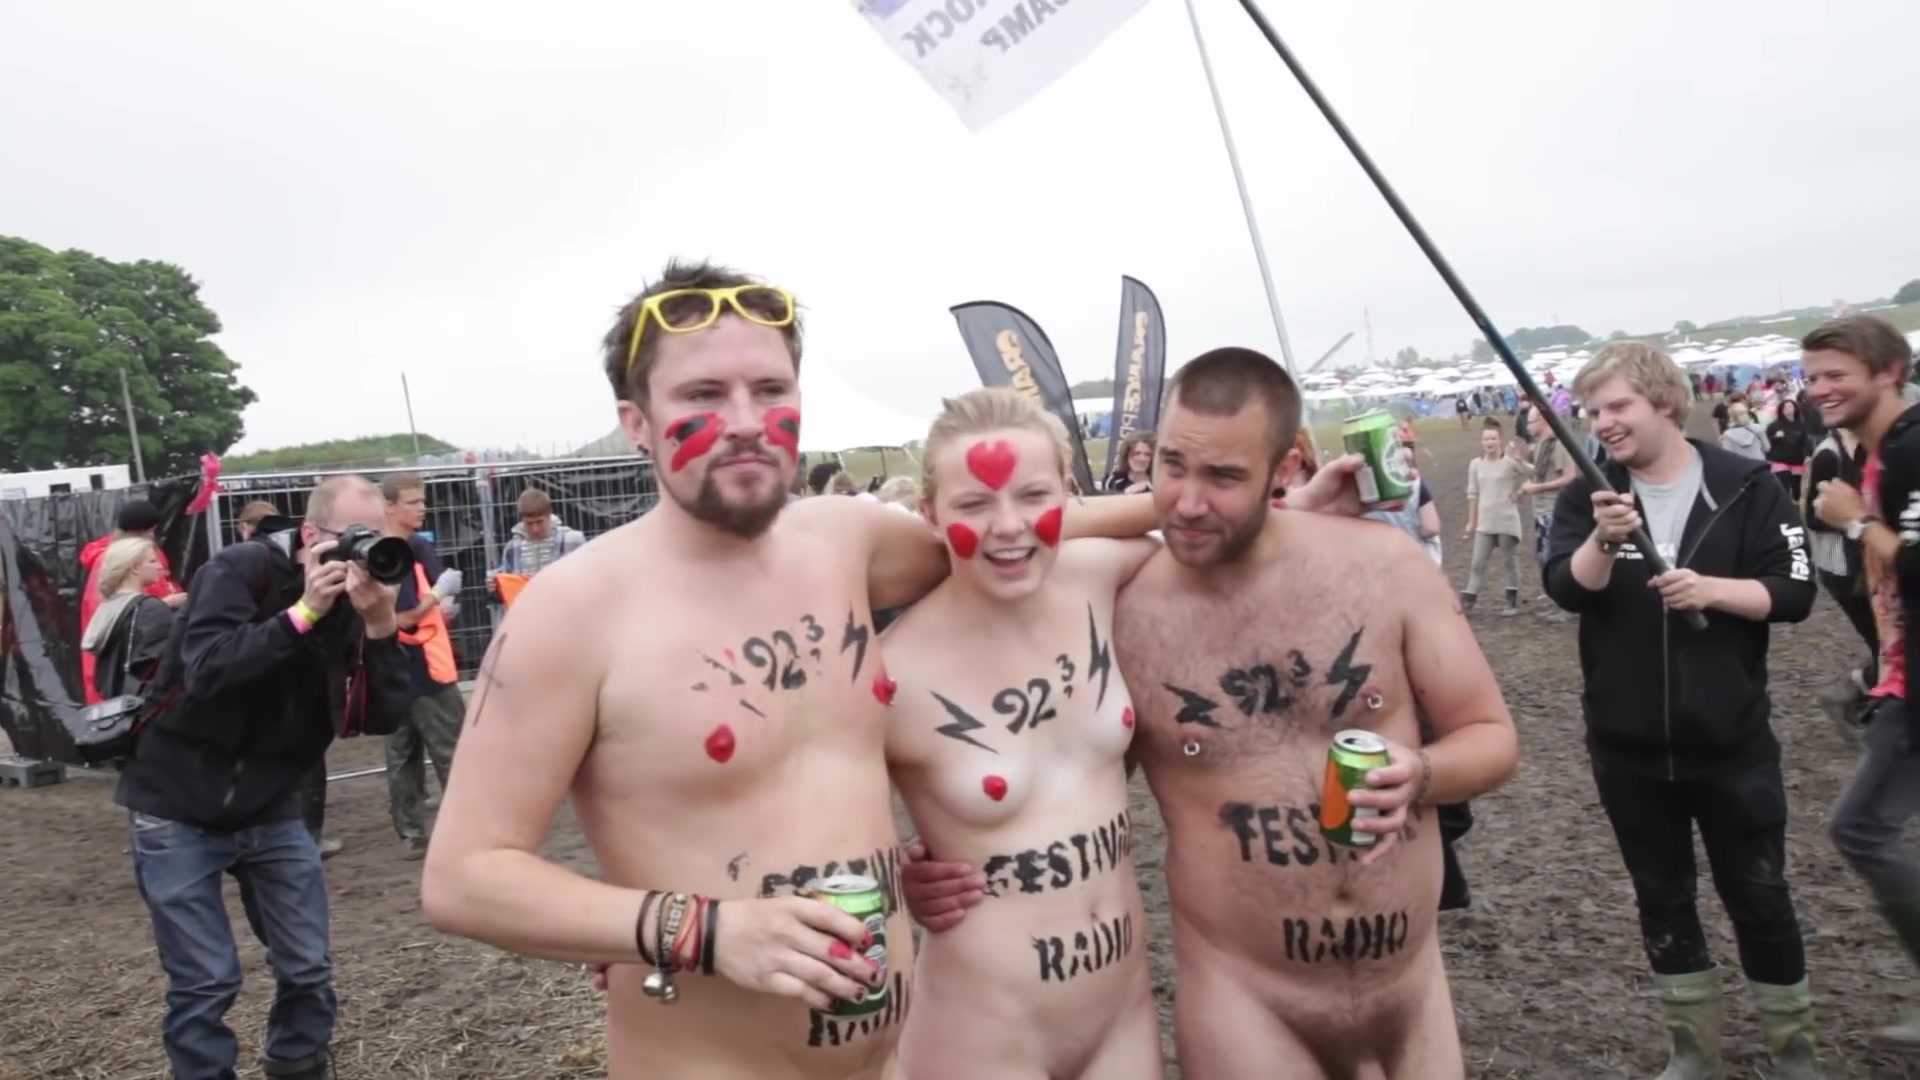 GREAT BOYS AND GIRL NAKED IN ROSKILDE